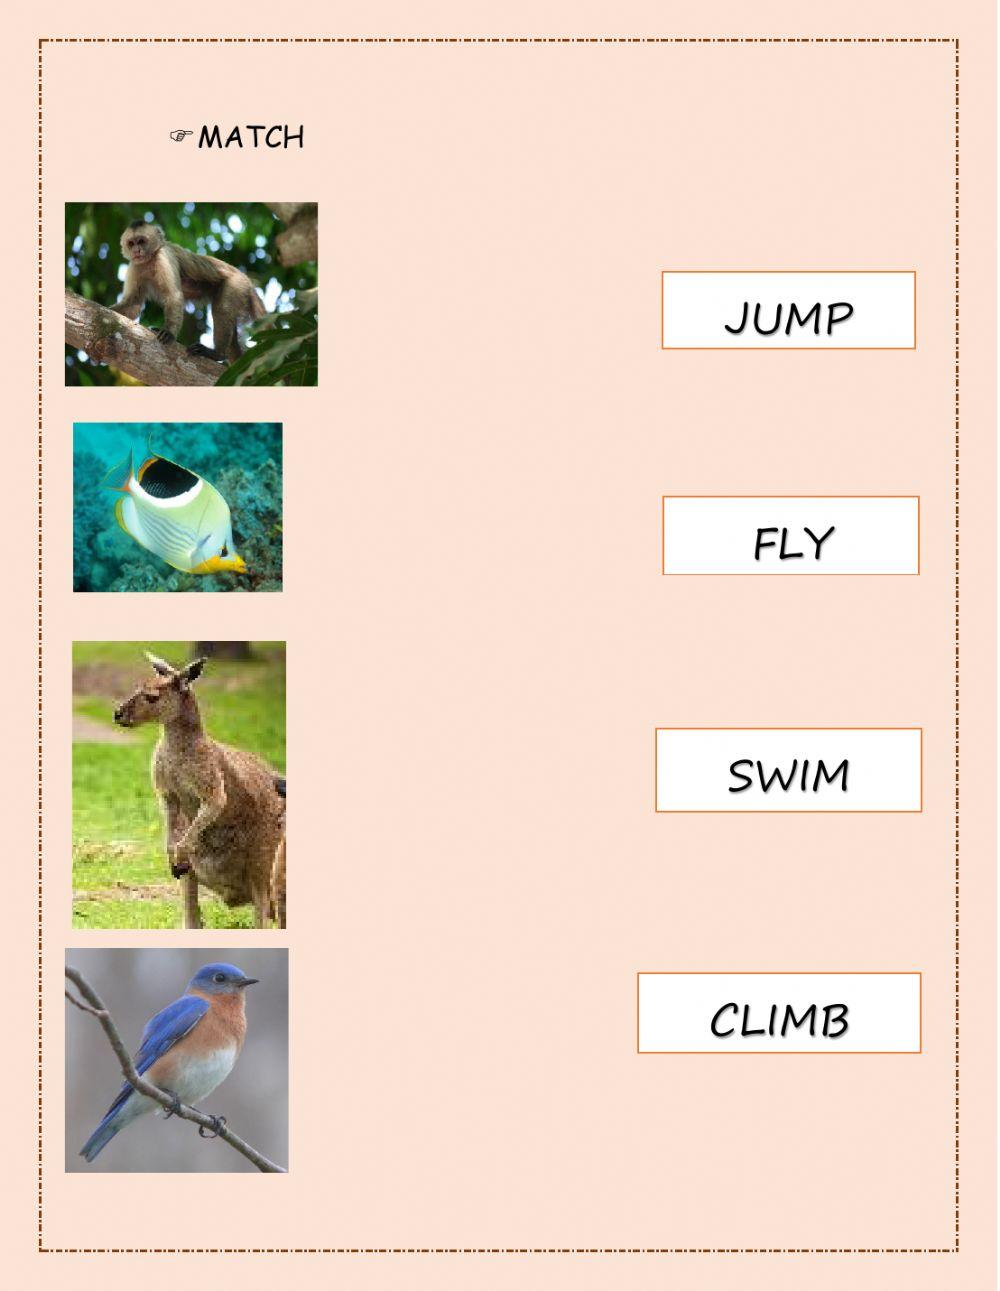 Animals and verbs